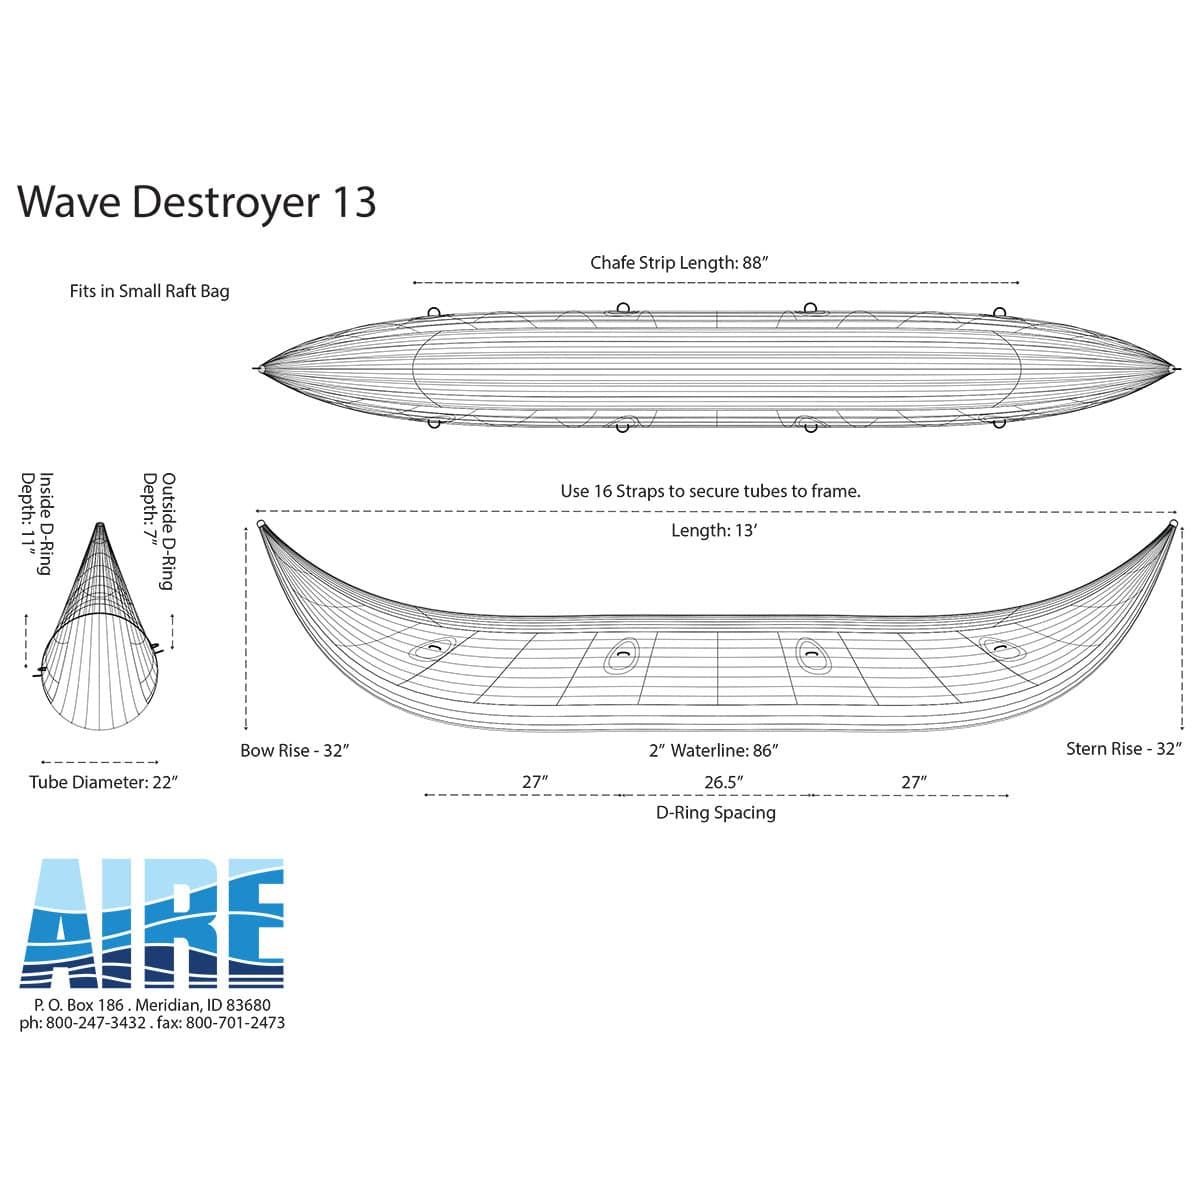 Featuring the Wave Destroyer Catarafts cataraft, fishing cat manufactured by AIRE shown here from a twelfth angle.